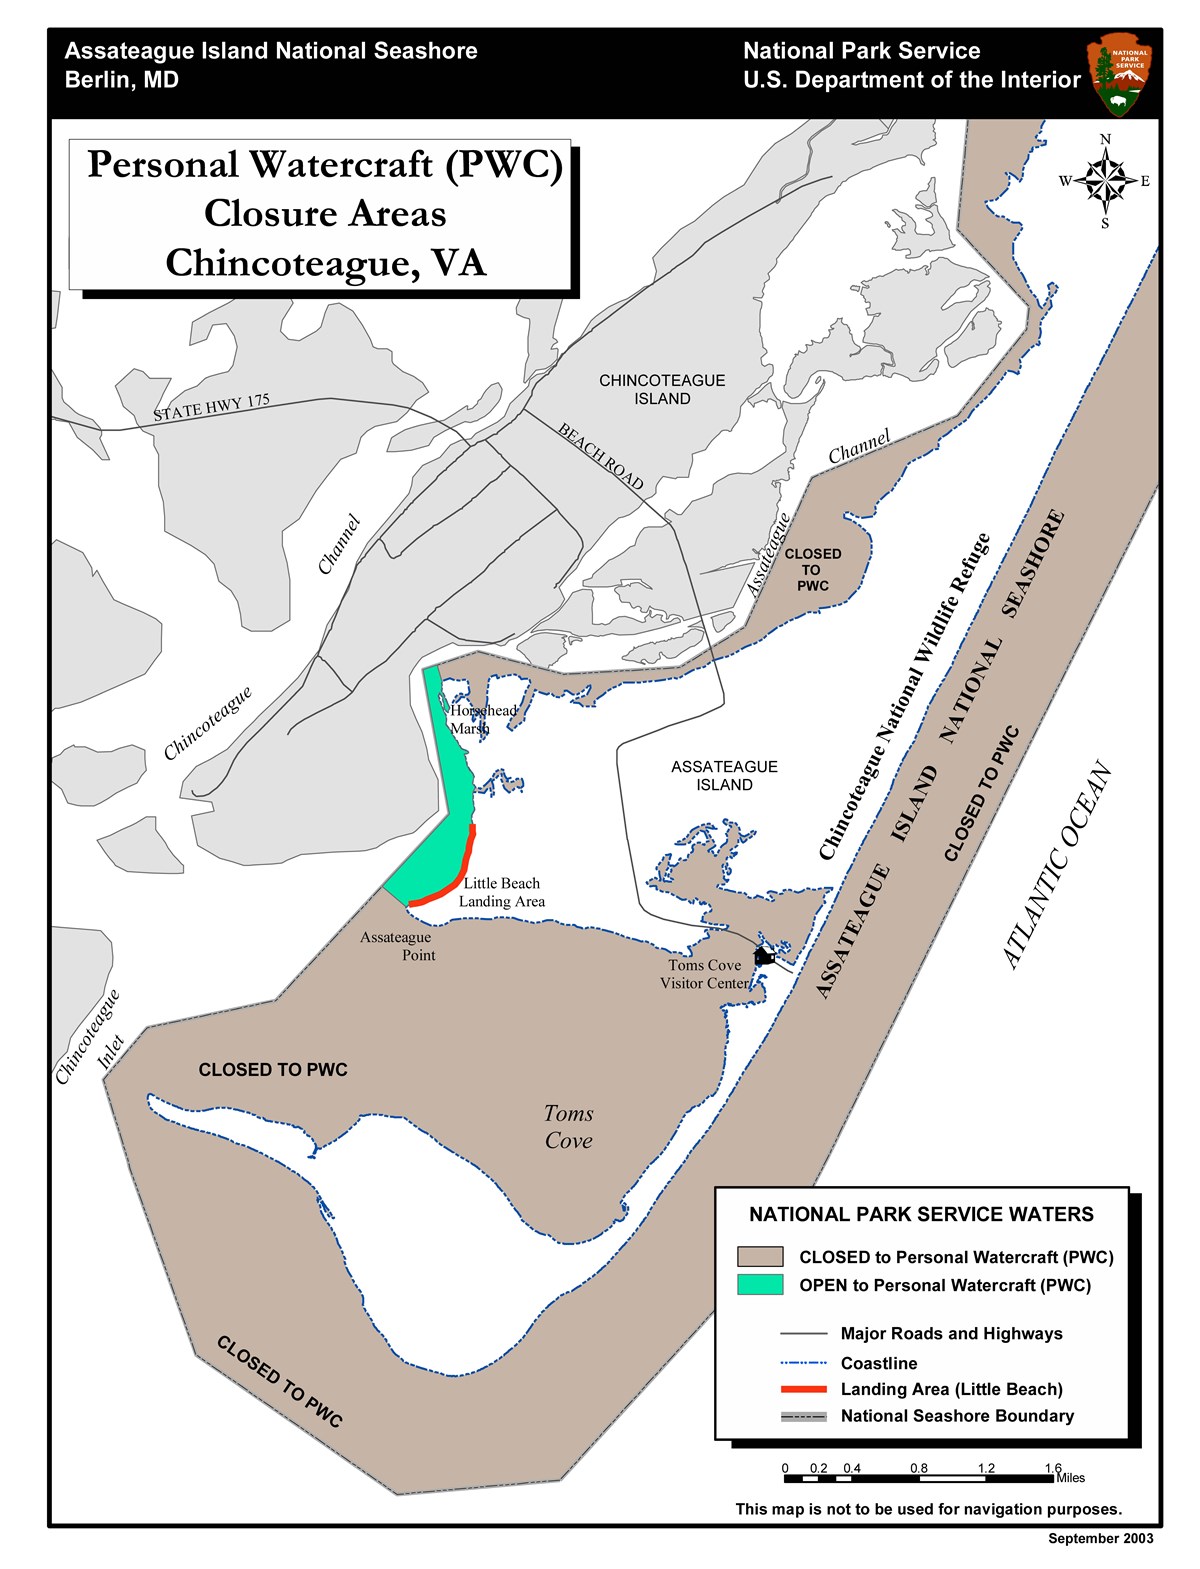 map of Personal Watercraft (PWC) closures and access areas in the Virginia District